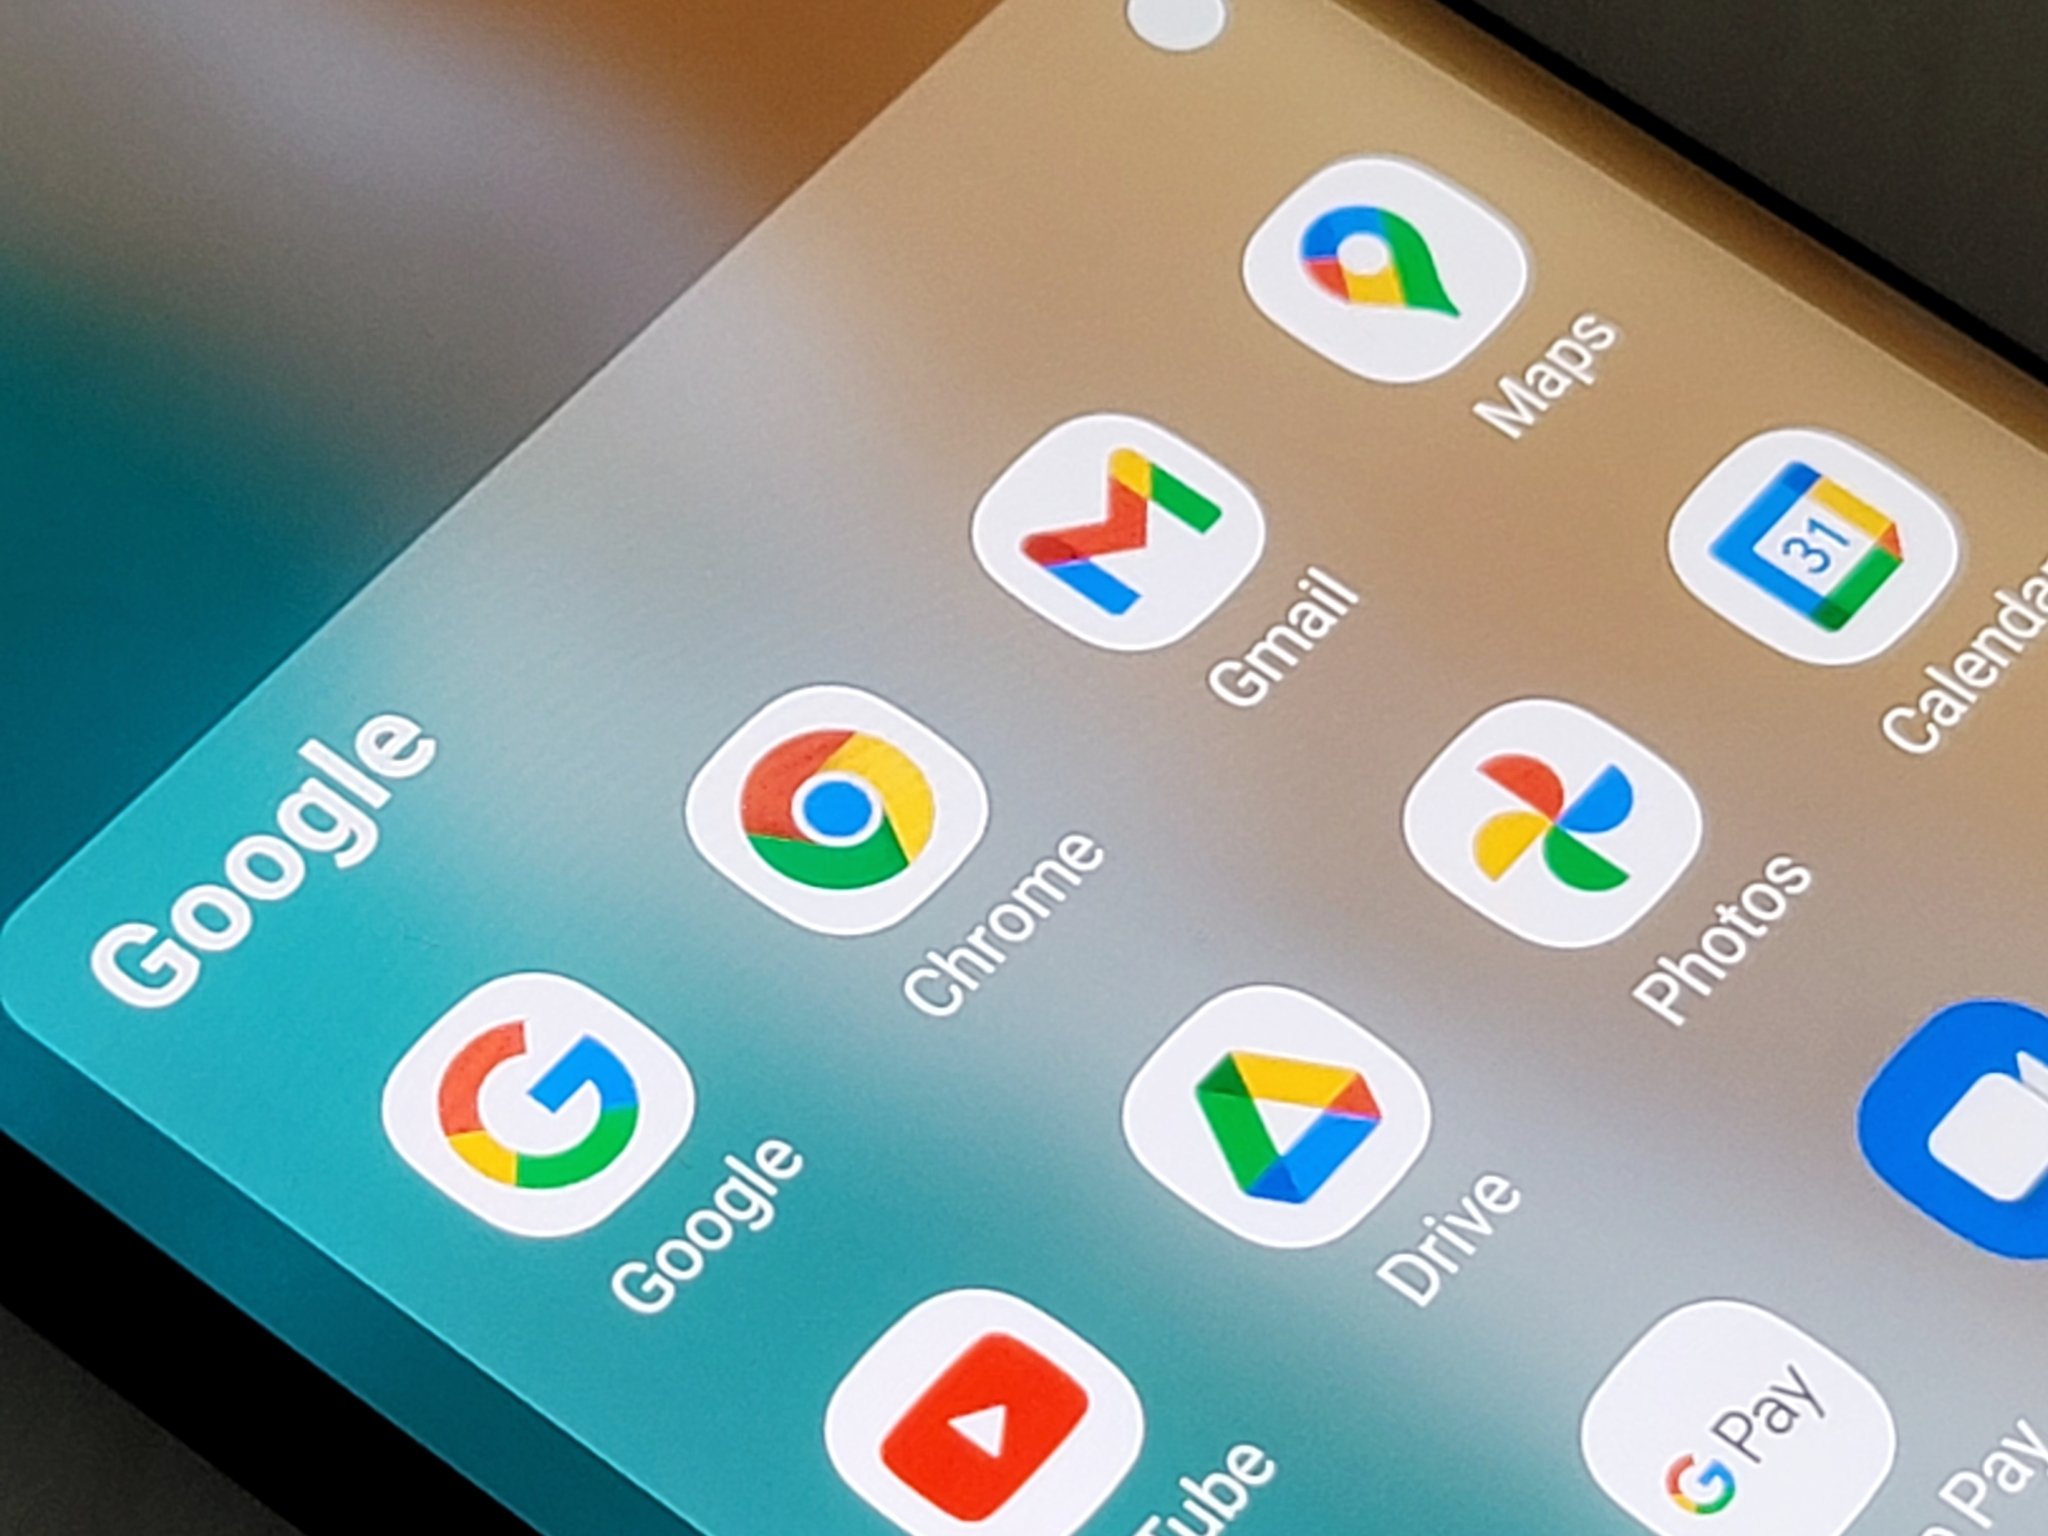 Poll: Have you been experiencing bugs in Google's Android apps lately?